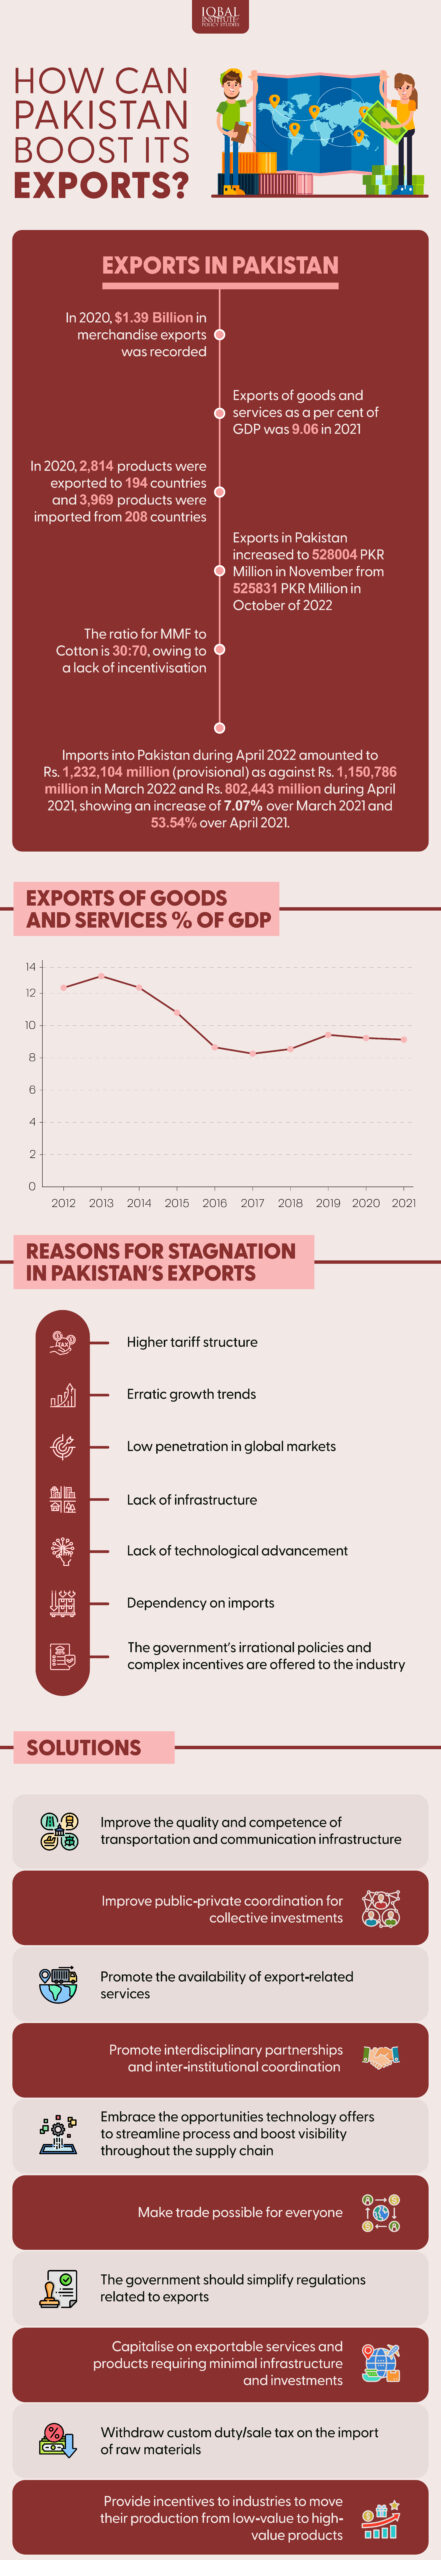 How can Pakistan Boost its Exports?